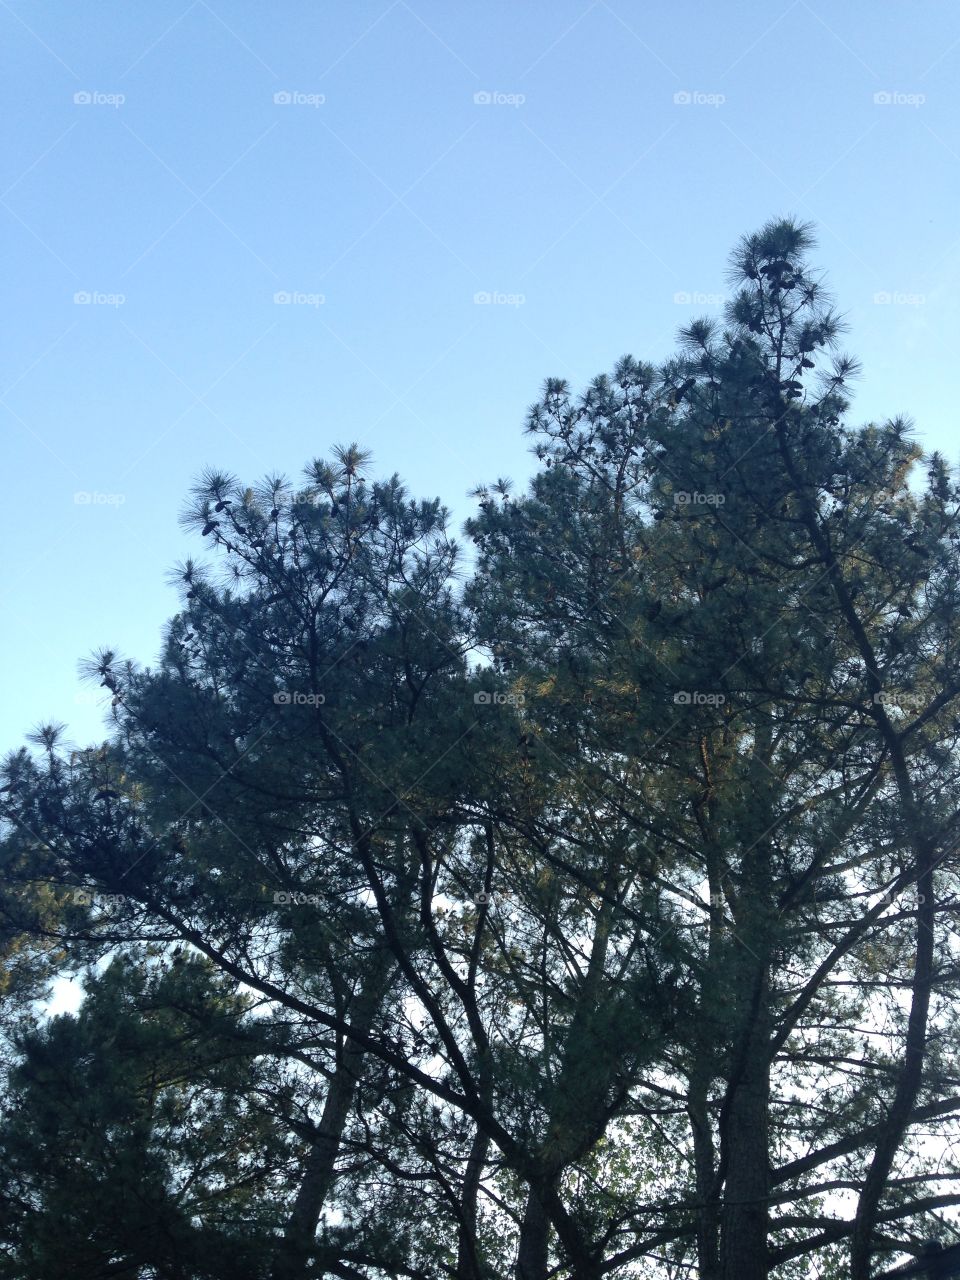 Pines growing tall. Pine trees in the sky